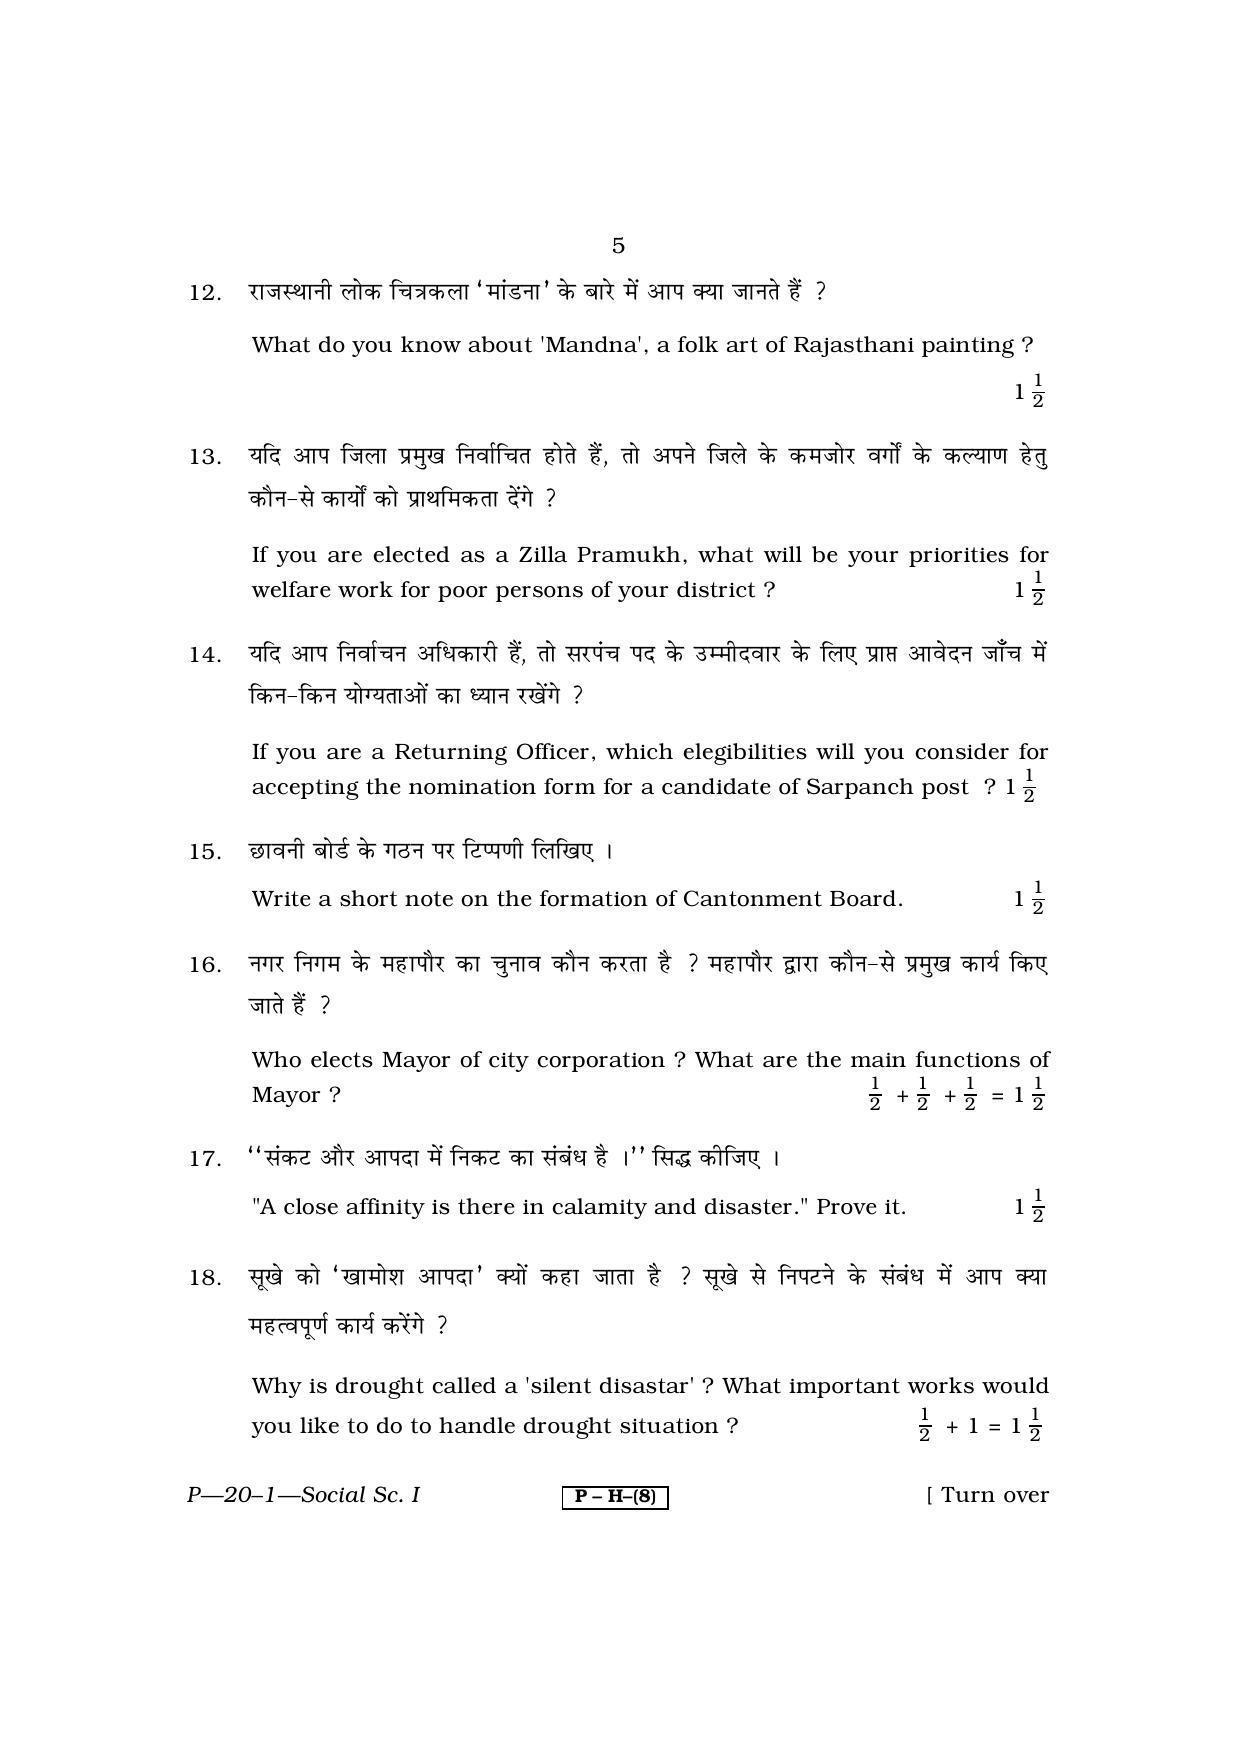 RBSE 2011 Social Science I Praveshika Question Paper - Page 5